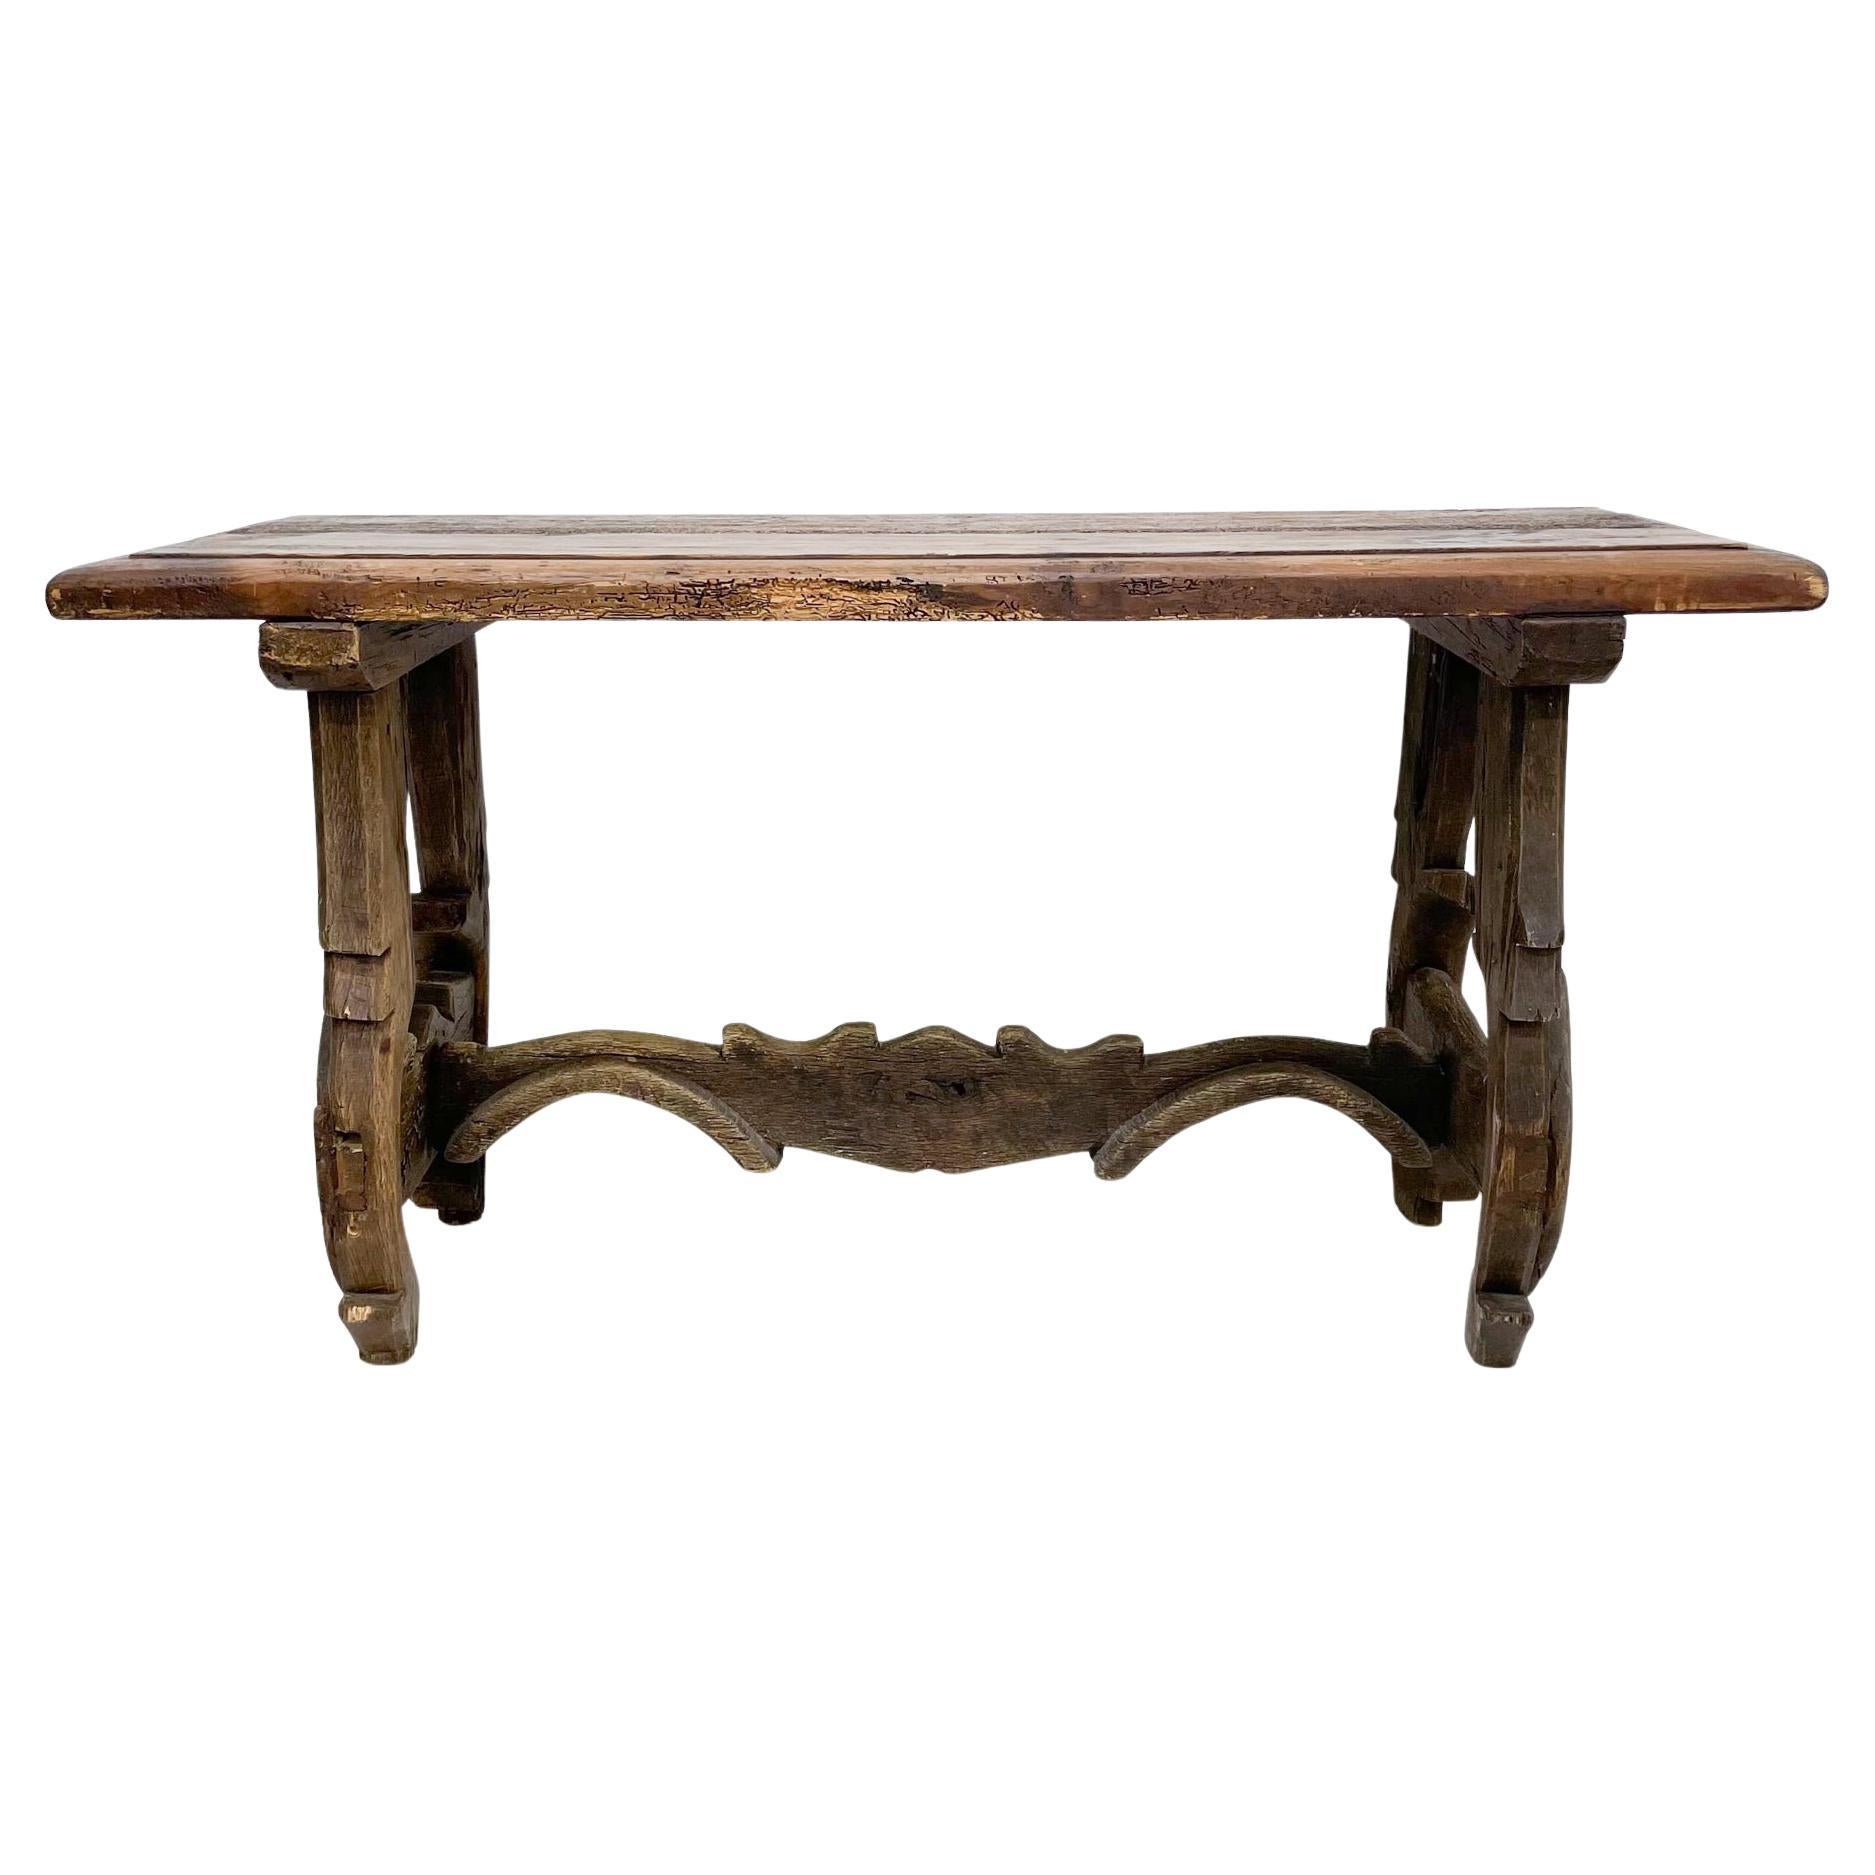 Table
Lovely Spanish colonial Hacienda receiving console table designed in sculptural rustic wood 1940s
Decorative wood similar to William Spratling design work at the time.
Measures: 21.5 D x 59.5 W x 31 H inches
In original distress, vintage